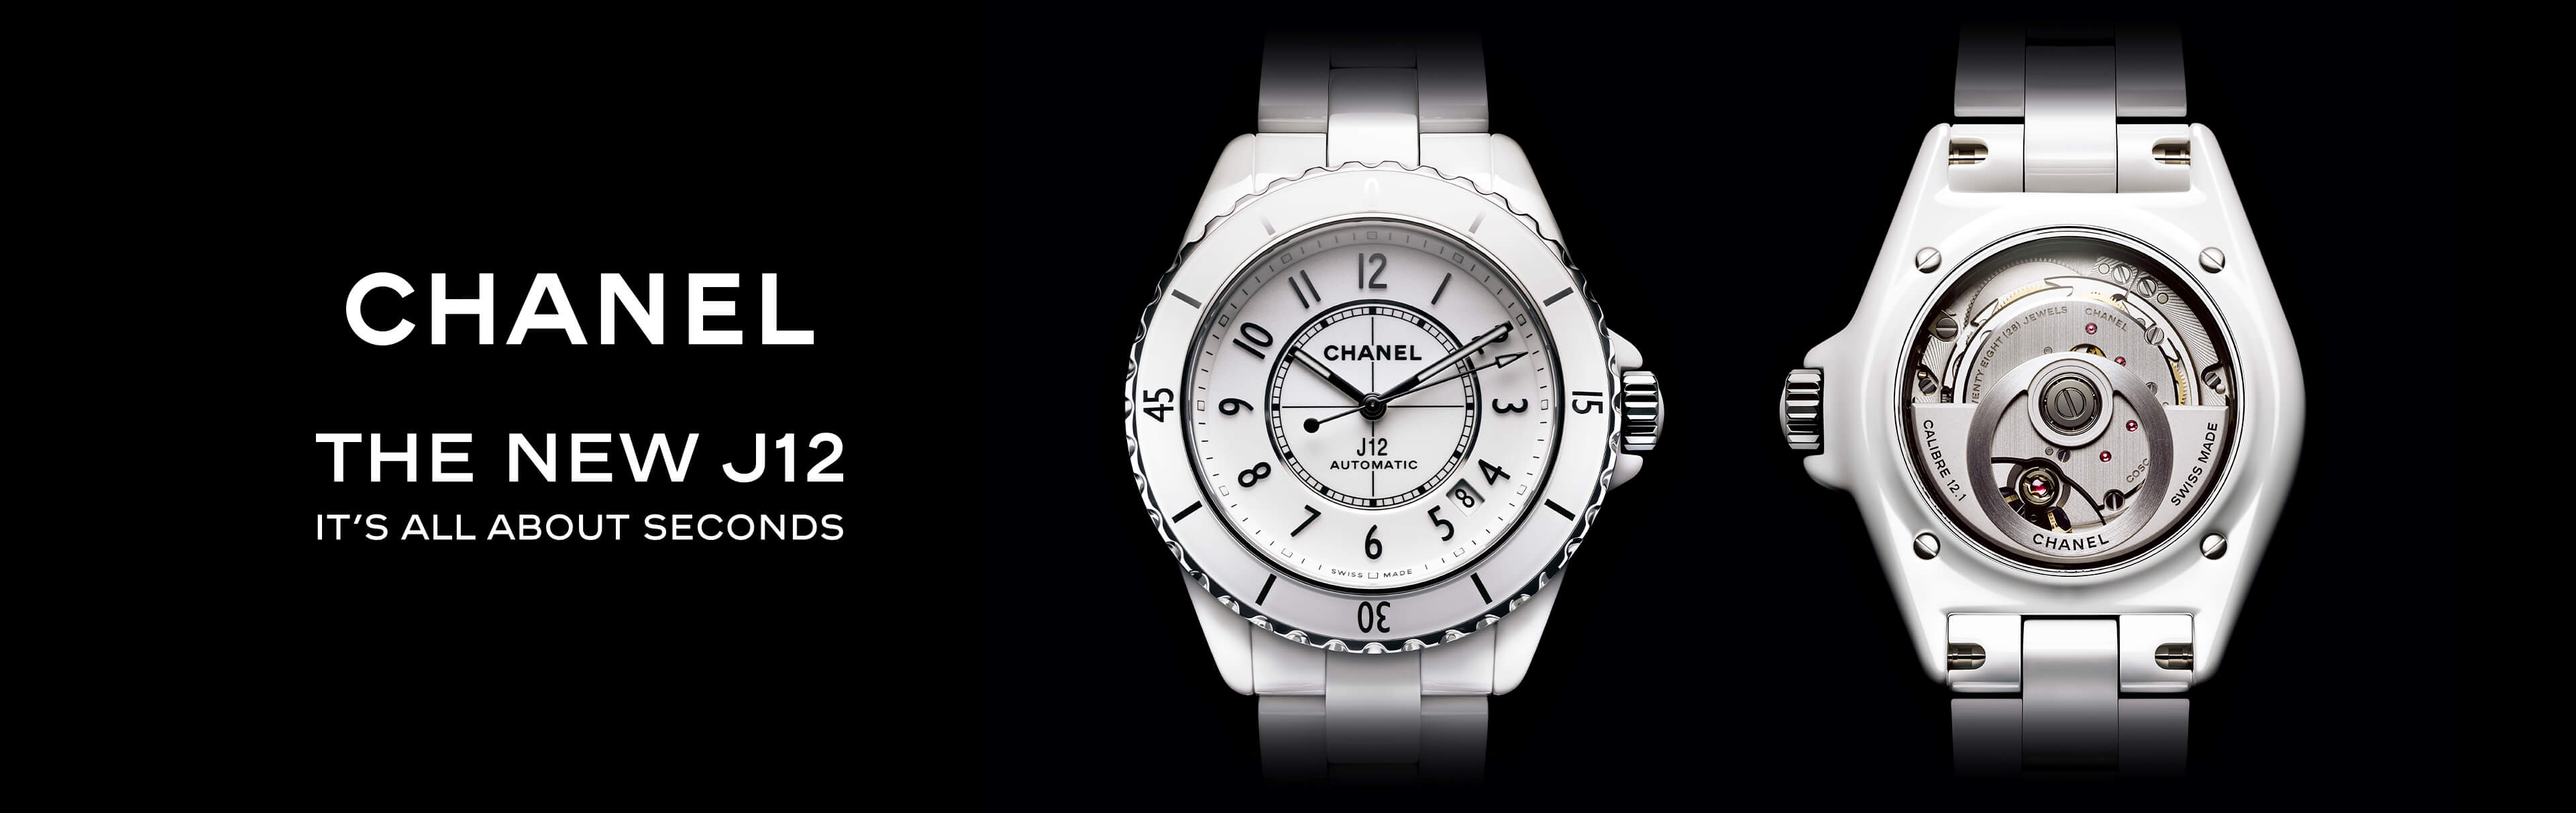 Discover Style with the New CHANEL J12 Watch